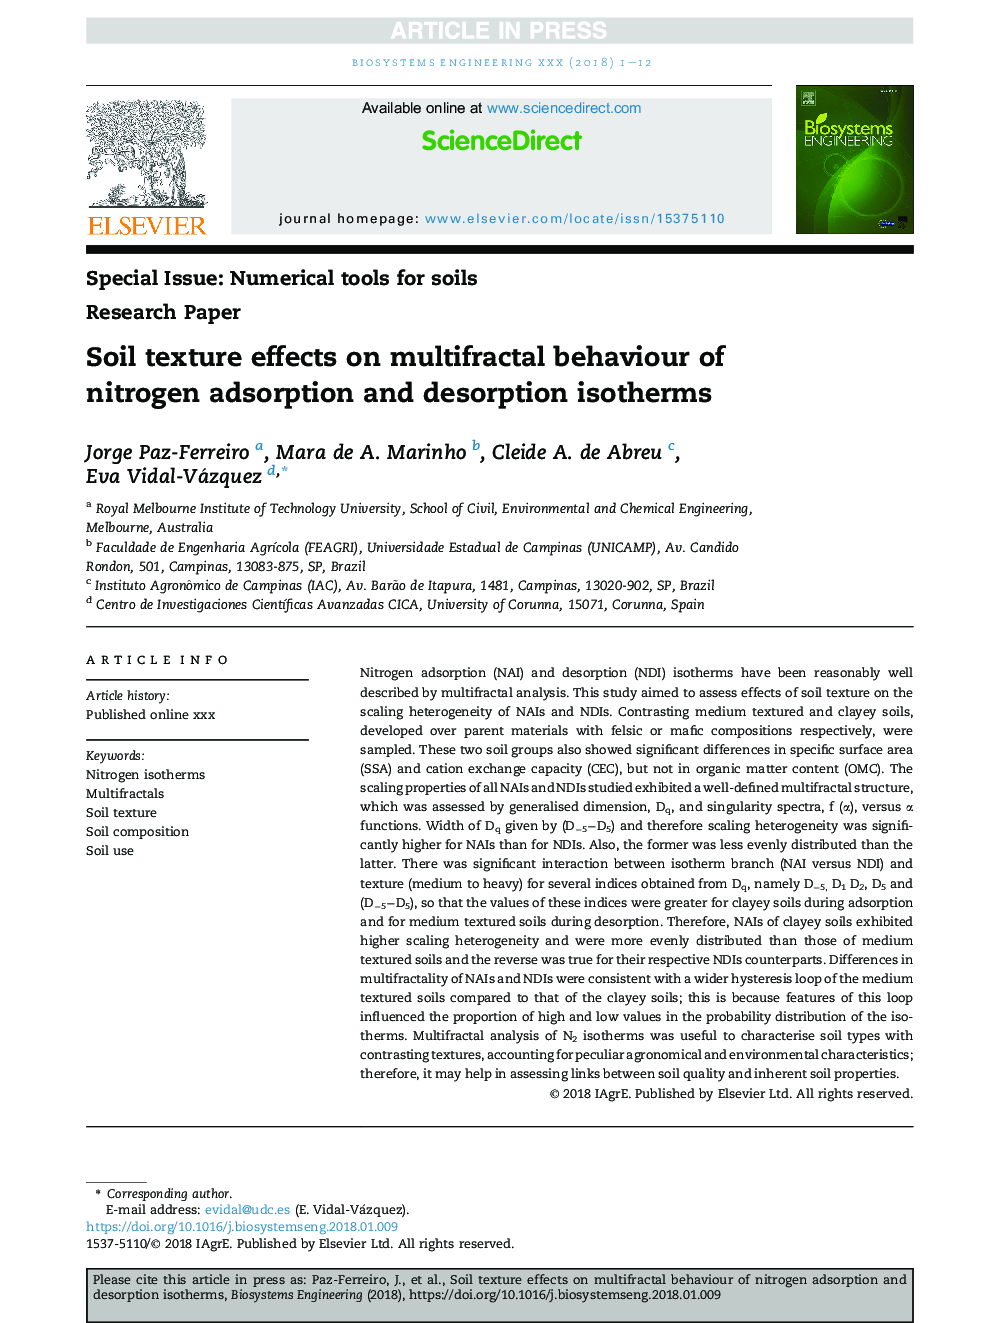 Soil texture effects on multifractal behaviour of nitrogen adsorption and desorption isotherms